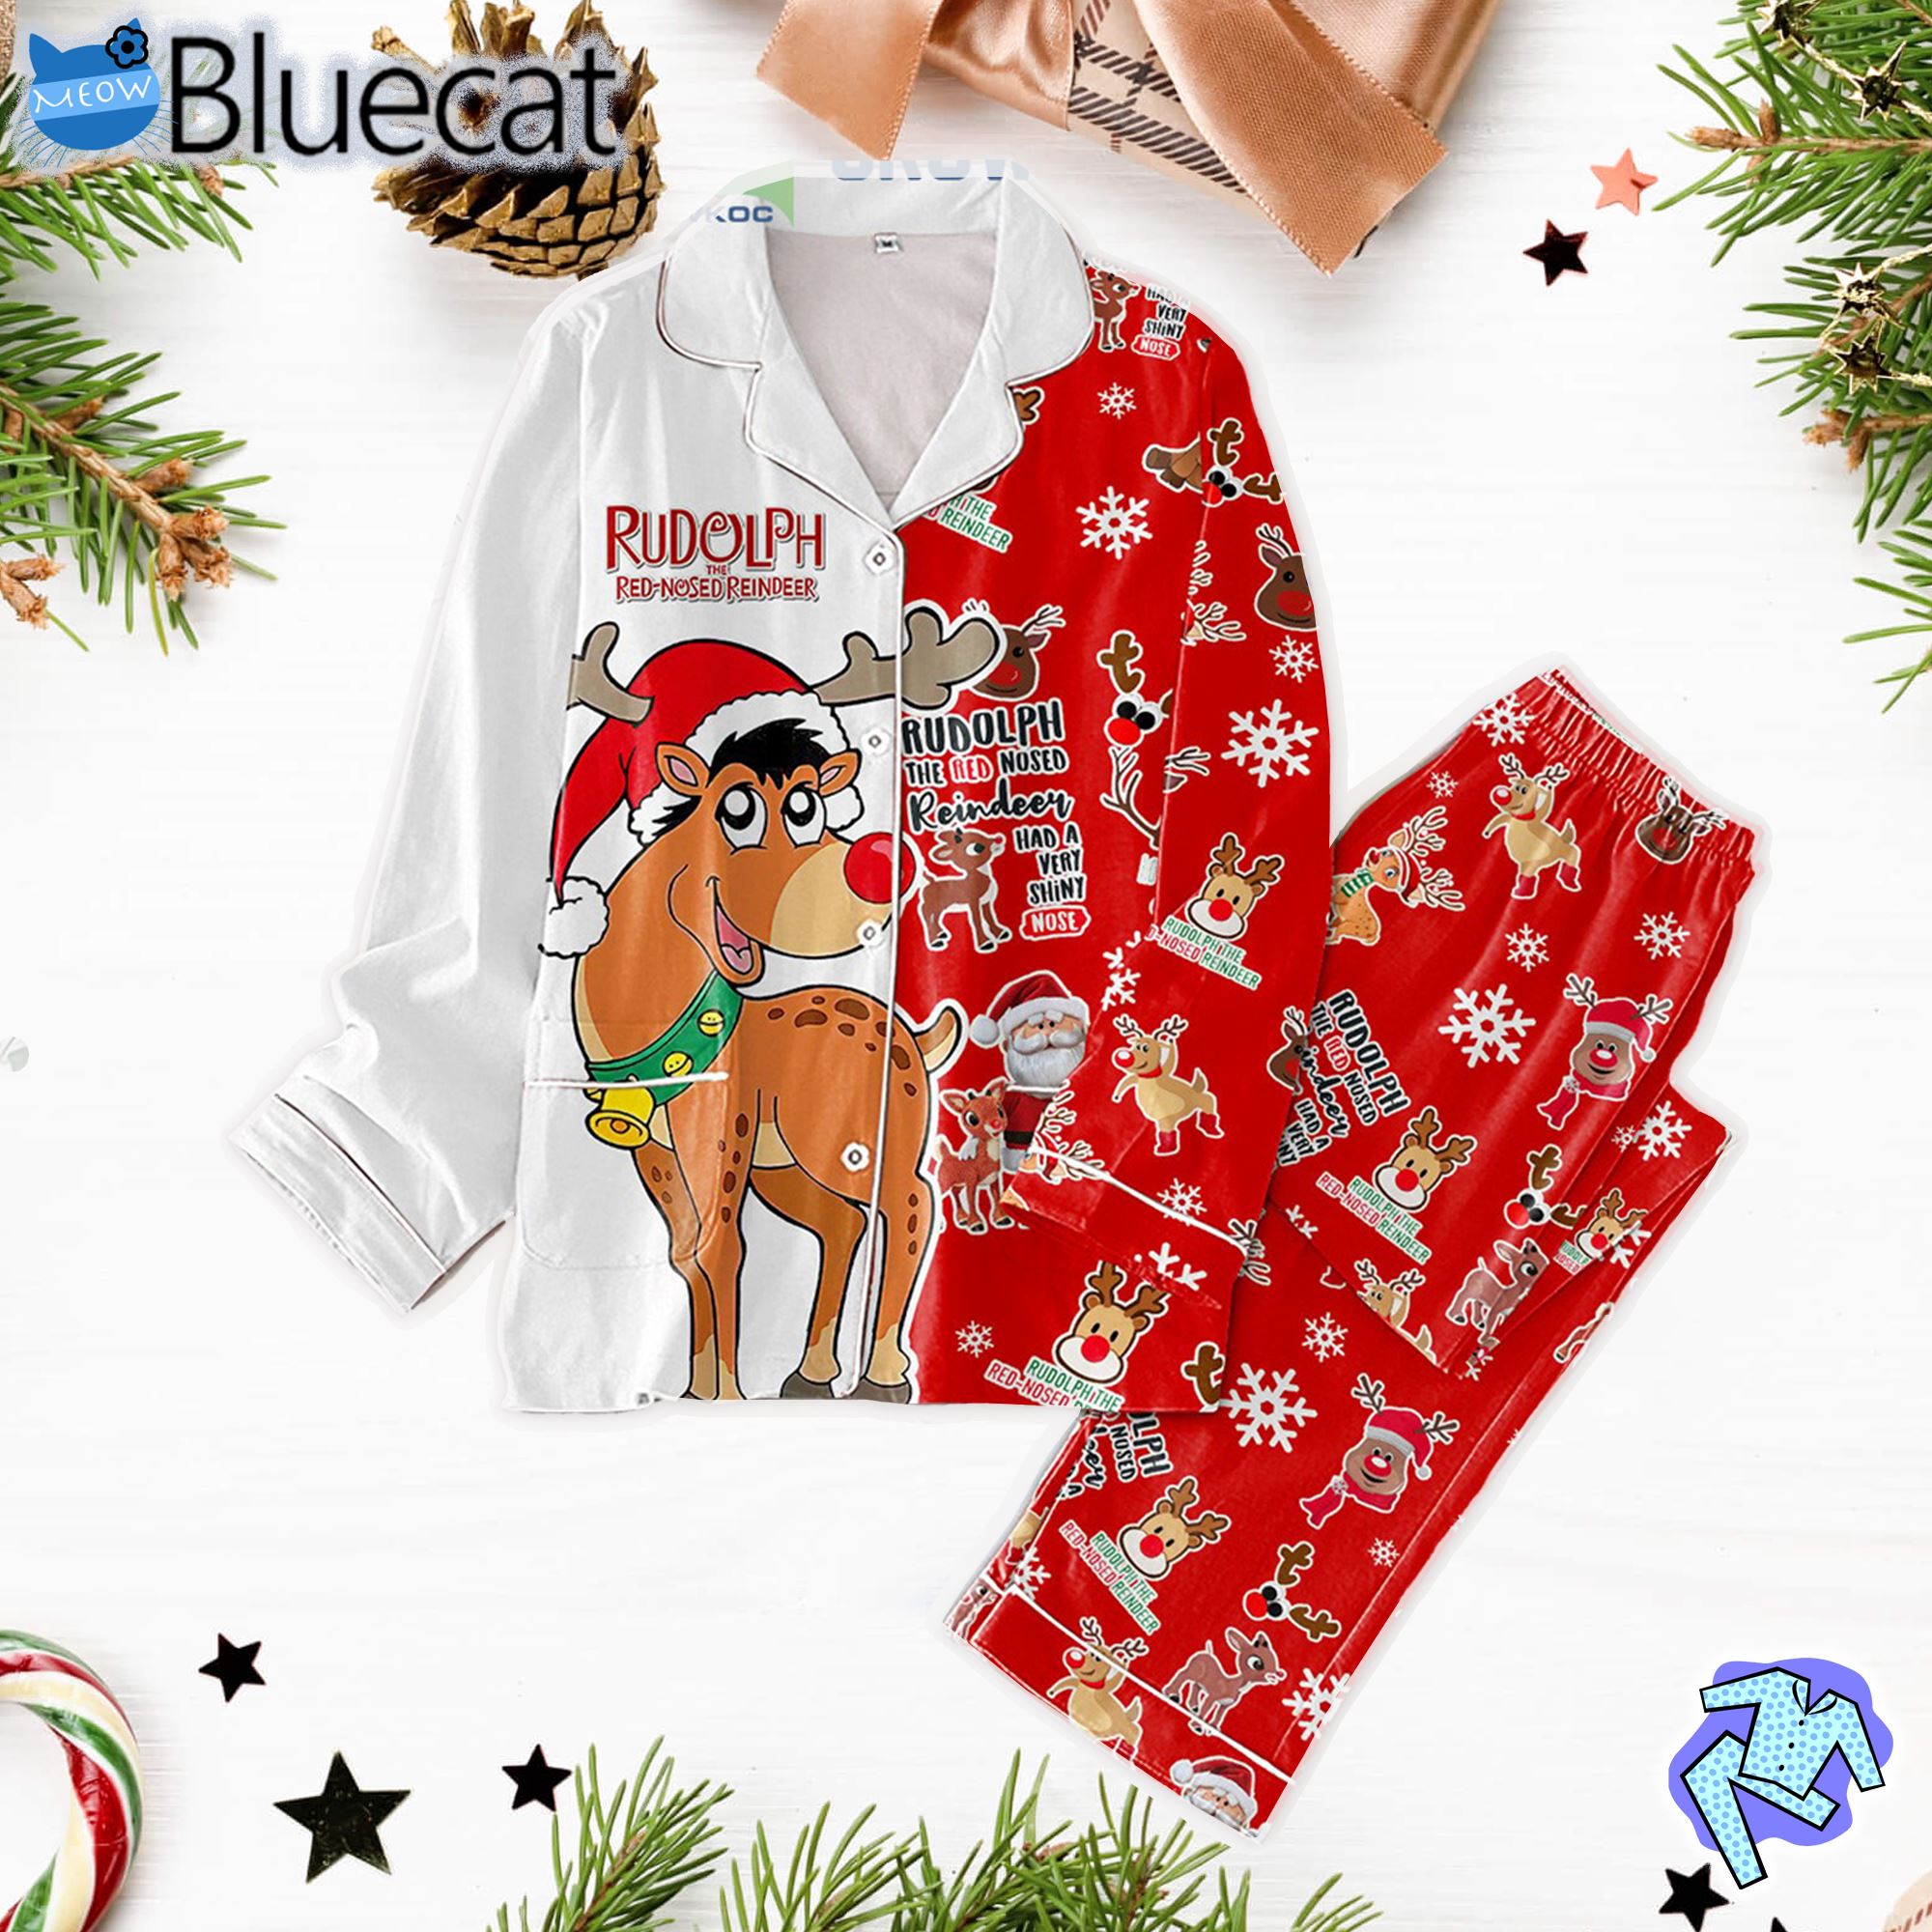 Rudolph The Red Nosed Reindeer Had A Very Shiny Nose Pajamas Set 